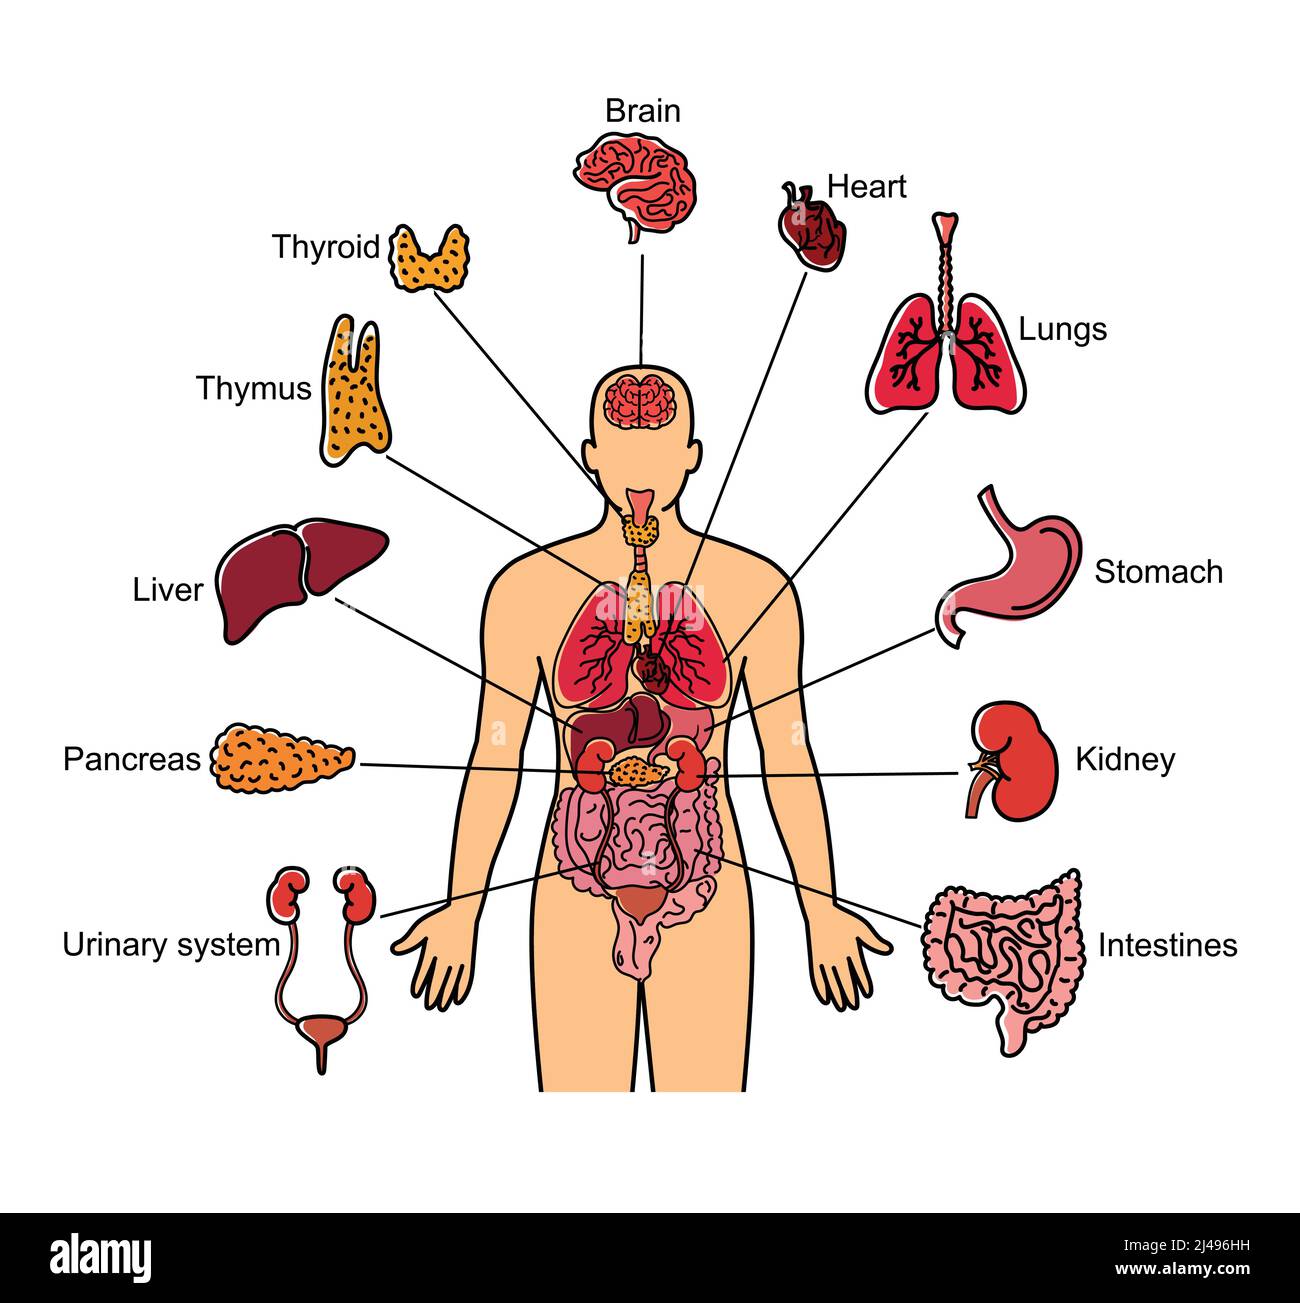 Human body and internal organs illustration isolated on white background Stock Vector